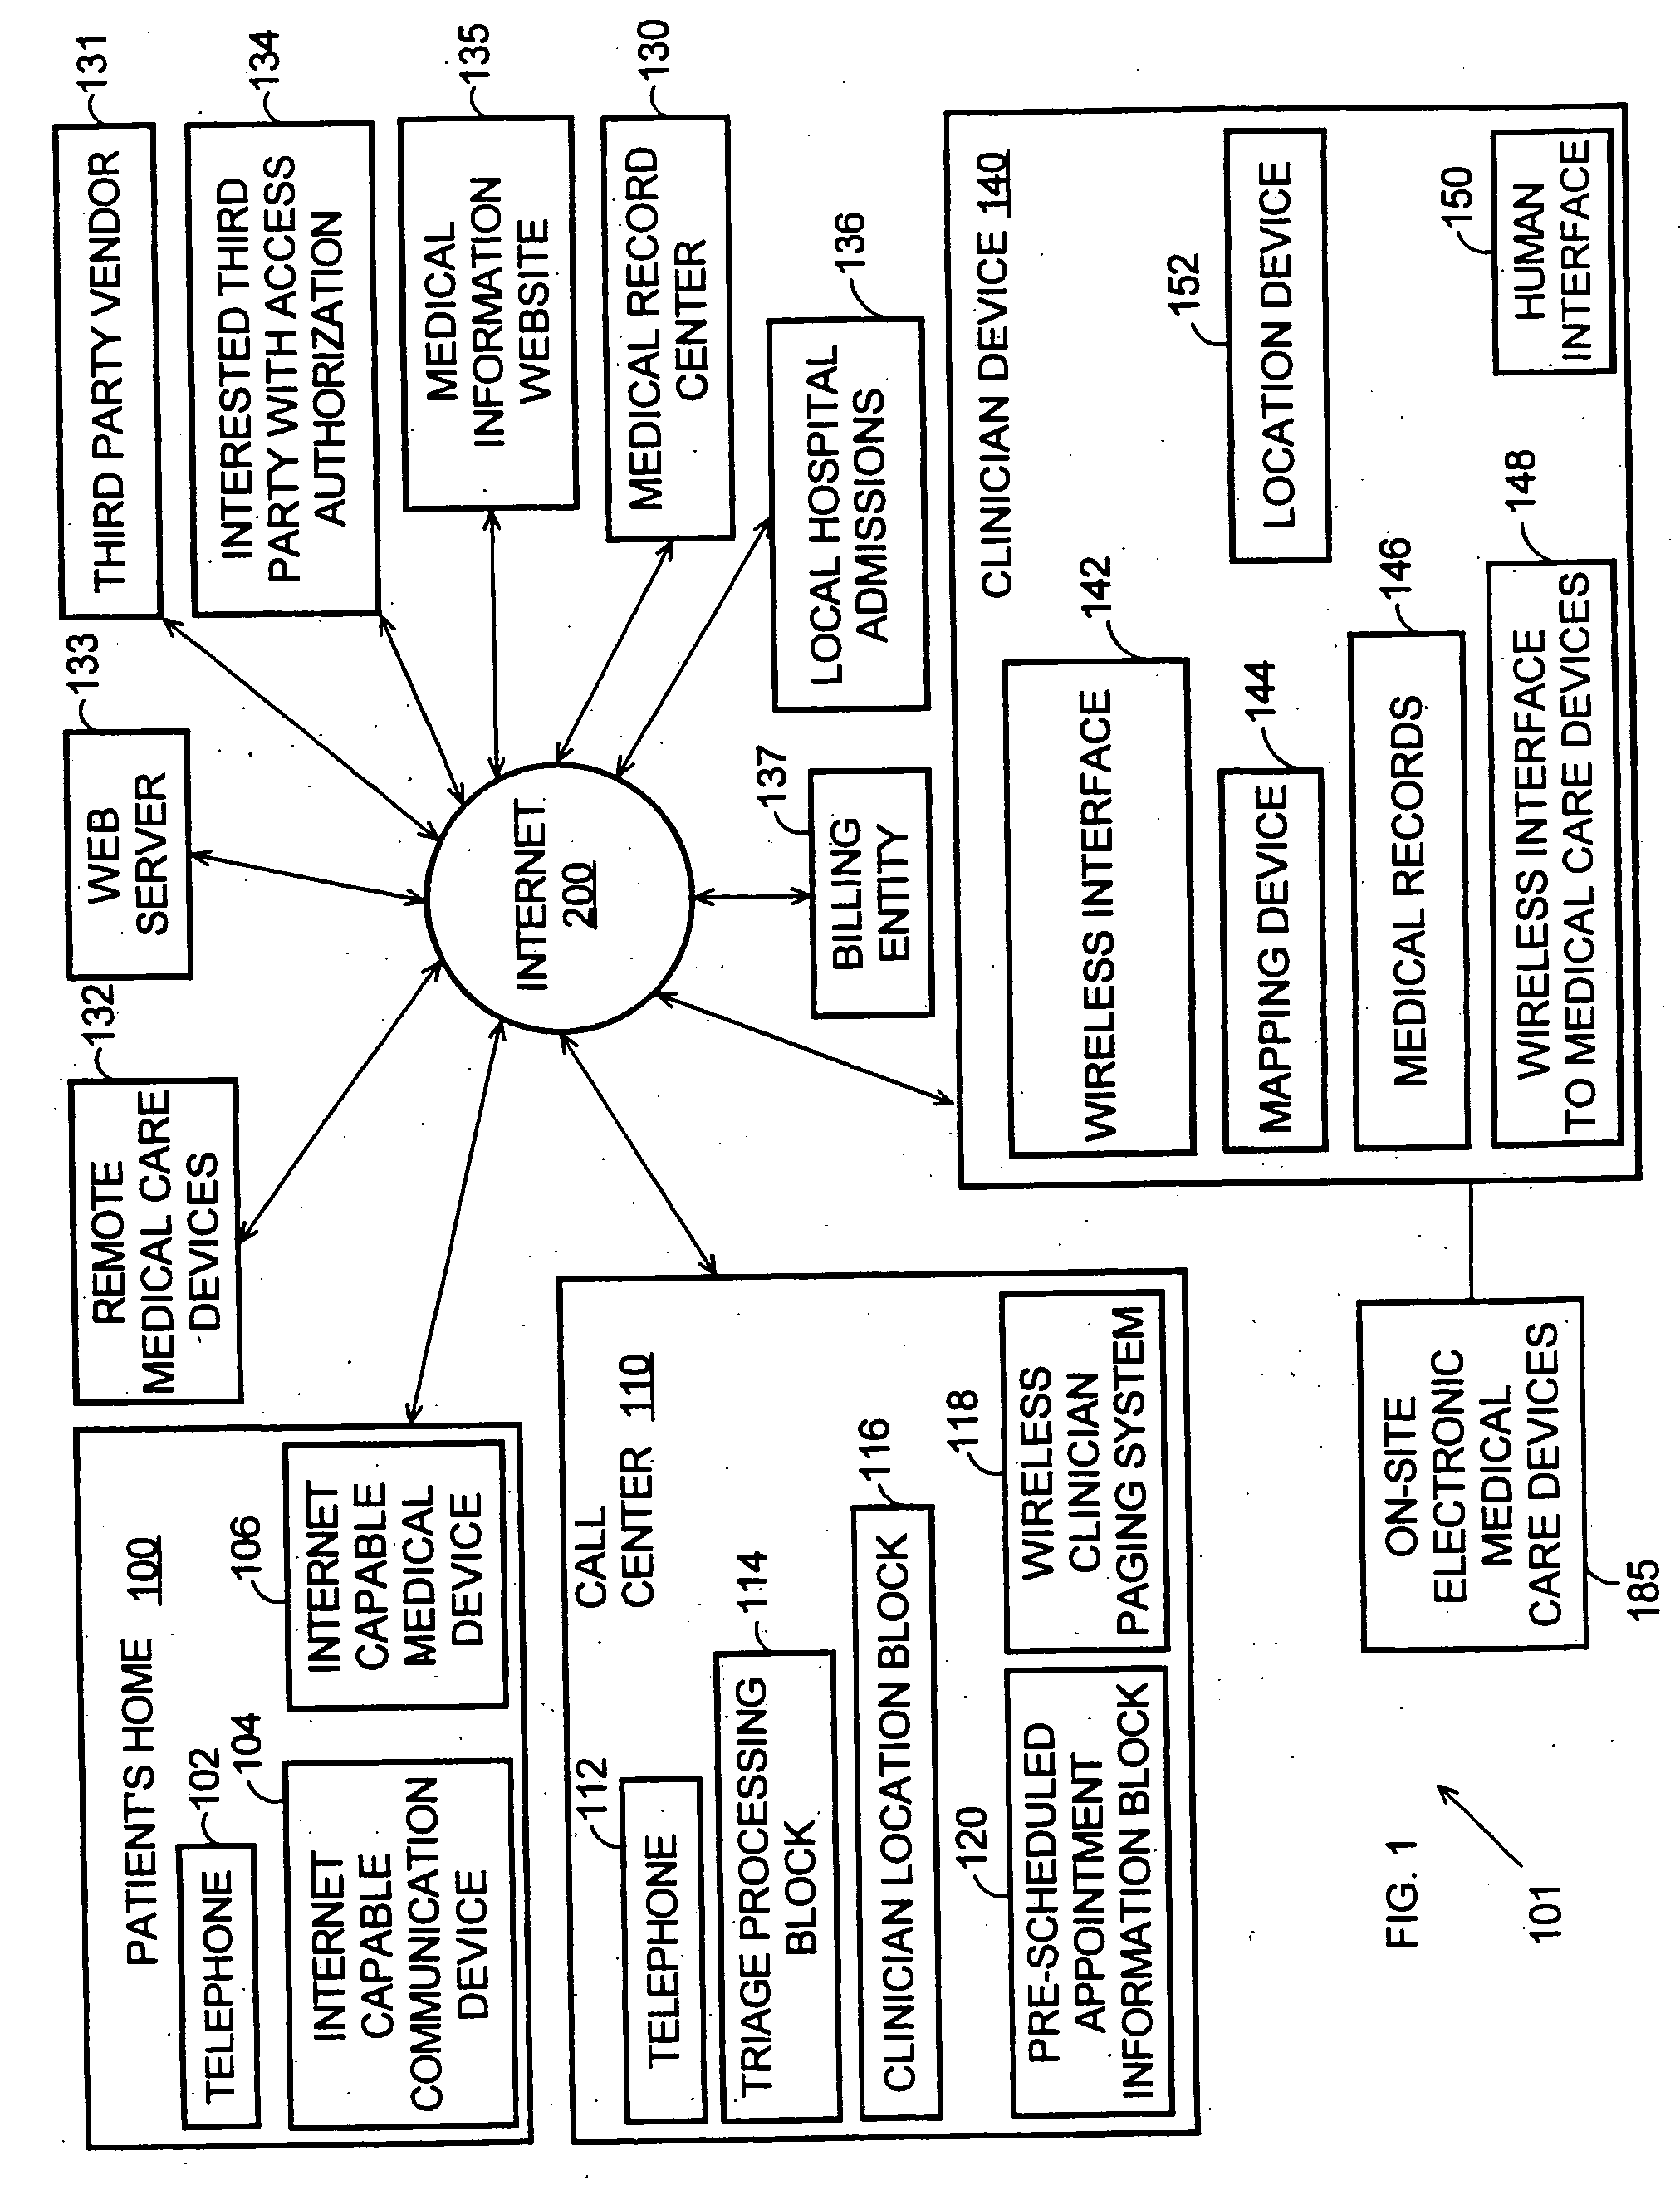 Method for clinician house calls utilizing portable computing and communications equipment